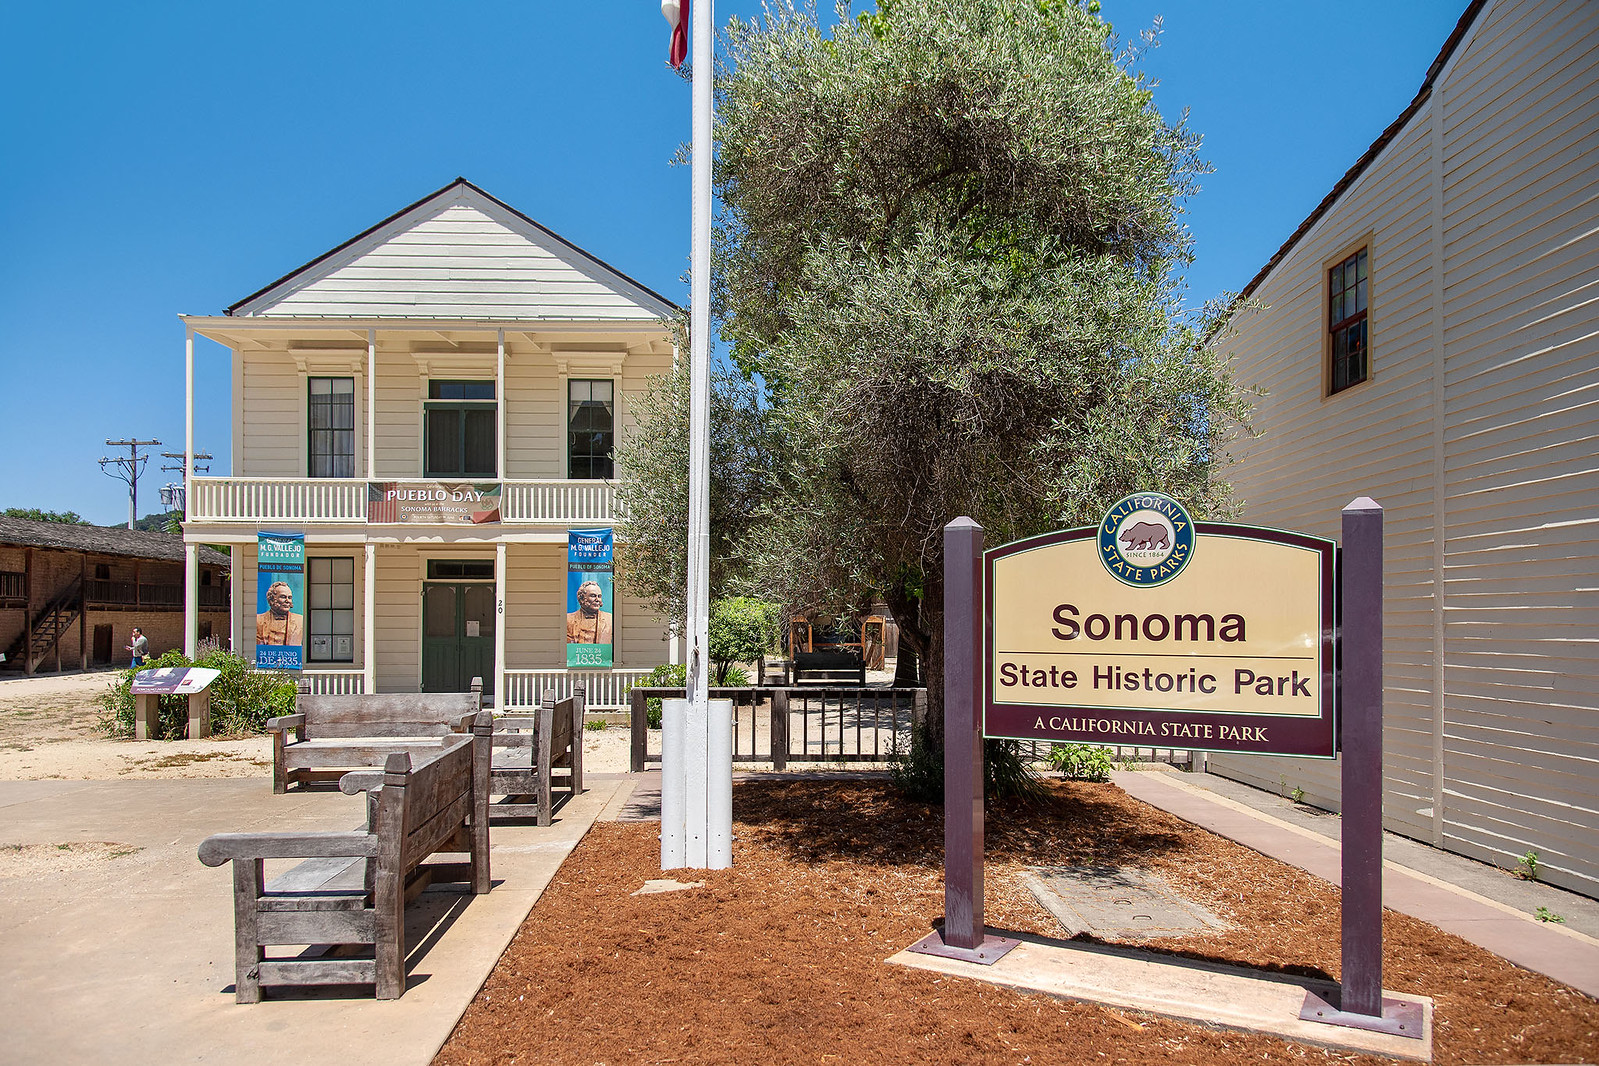 Cover Image for 16690 Mission Way, Sonoma presented by Avram Goldman